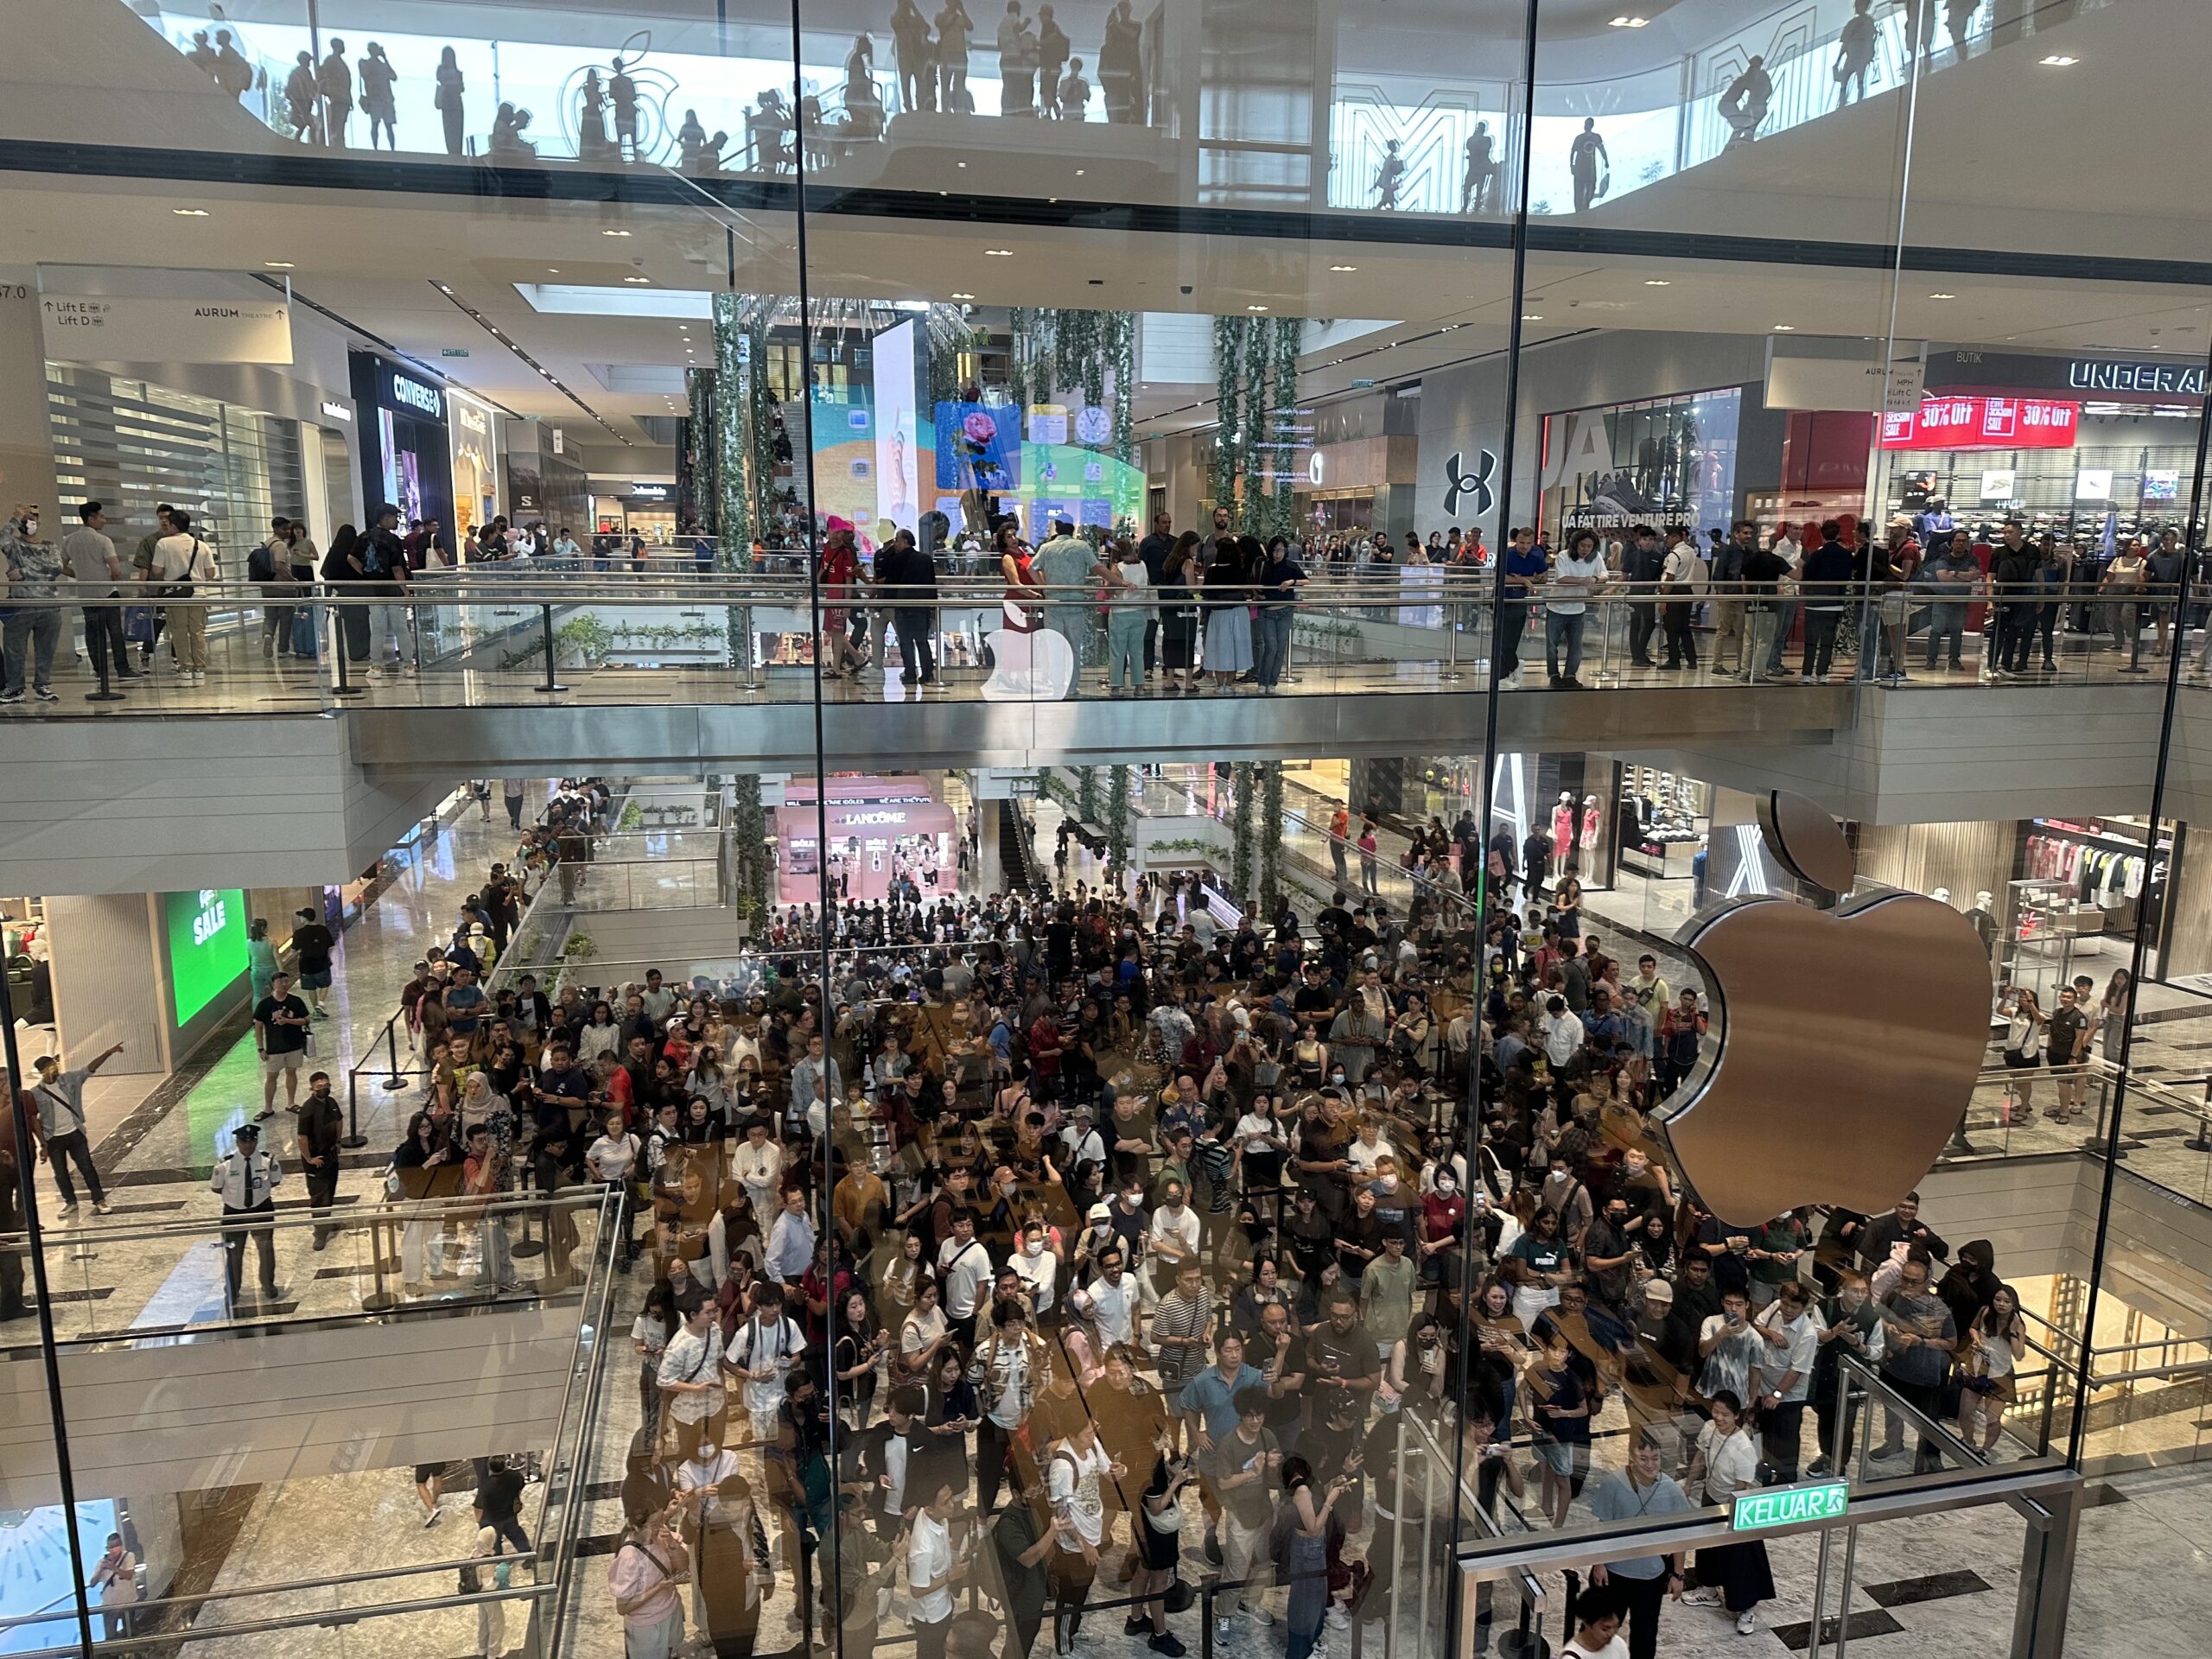 Huge crowd spotted at trx as many flock to visit first apple store in m’sia  | weirdkaya